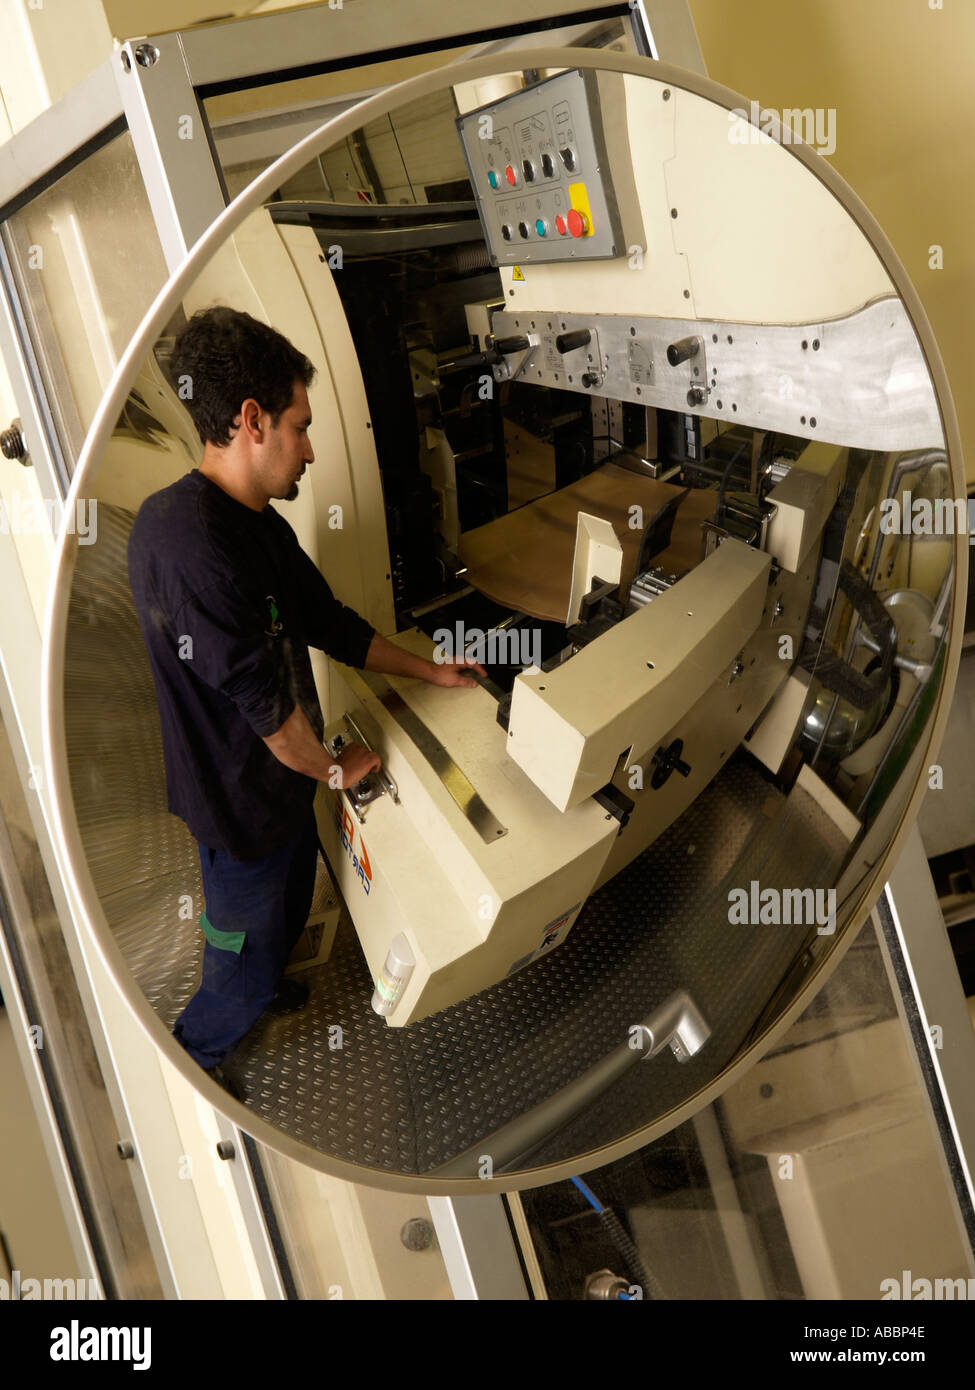 Round wide angle view safety mirror in manufactoring plant with man working visible factory industry industrial Stock Photo